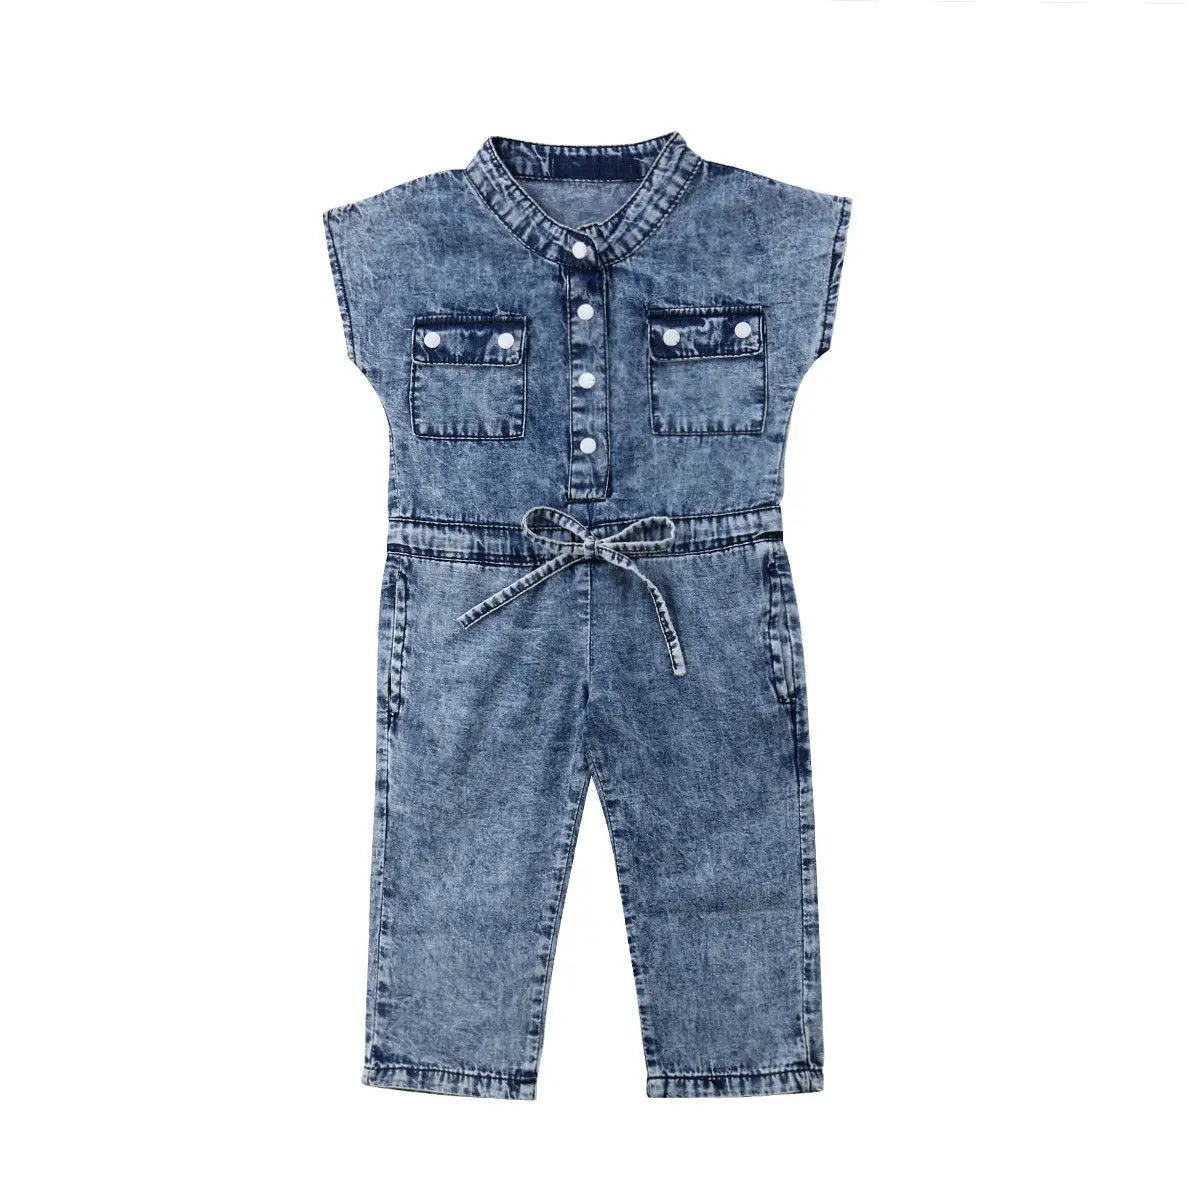 Summer Toddler Kids Baby Girl Clothing Denim Sleeveless Romper Jumpsuit Playsuit Long Pants Outfits 1-6T LUXLIFE BRANDS